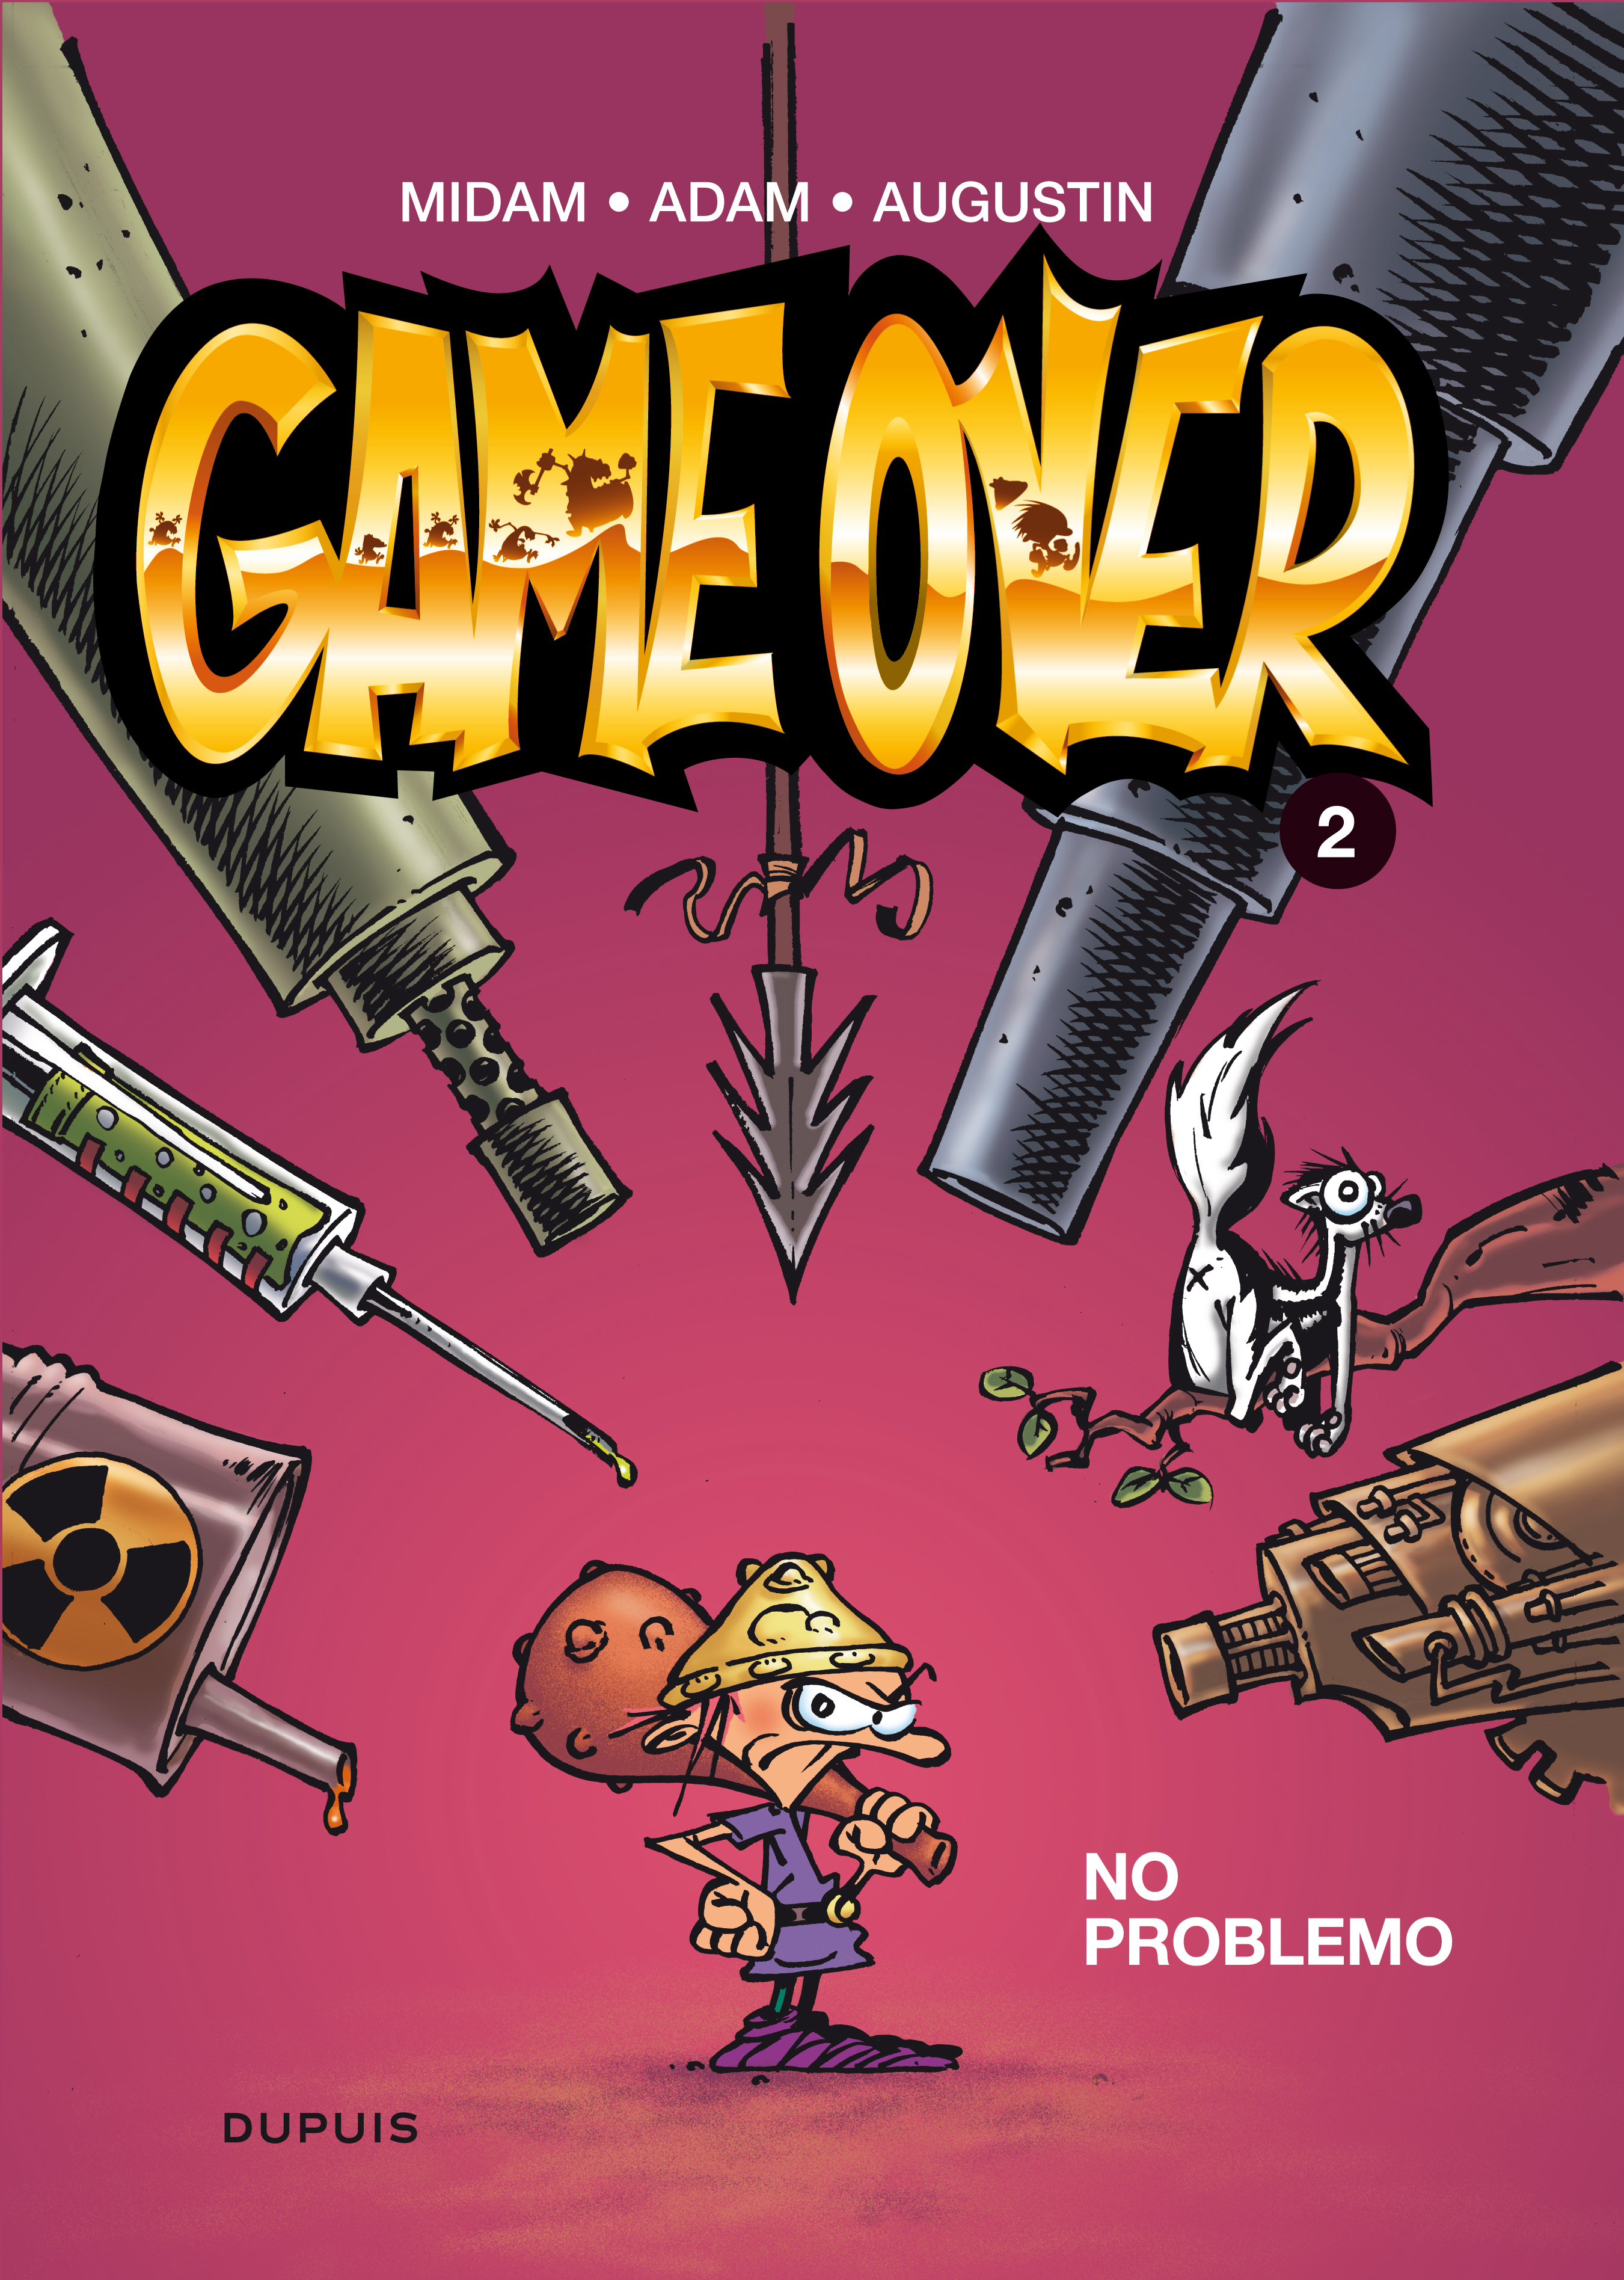 All Comics from Kid Paddle & Game Over